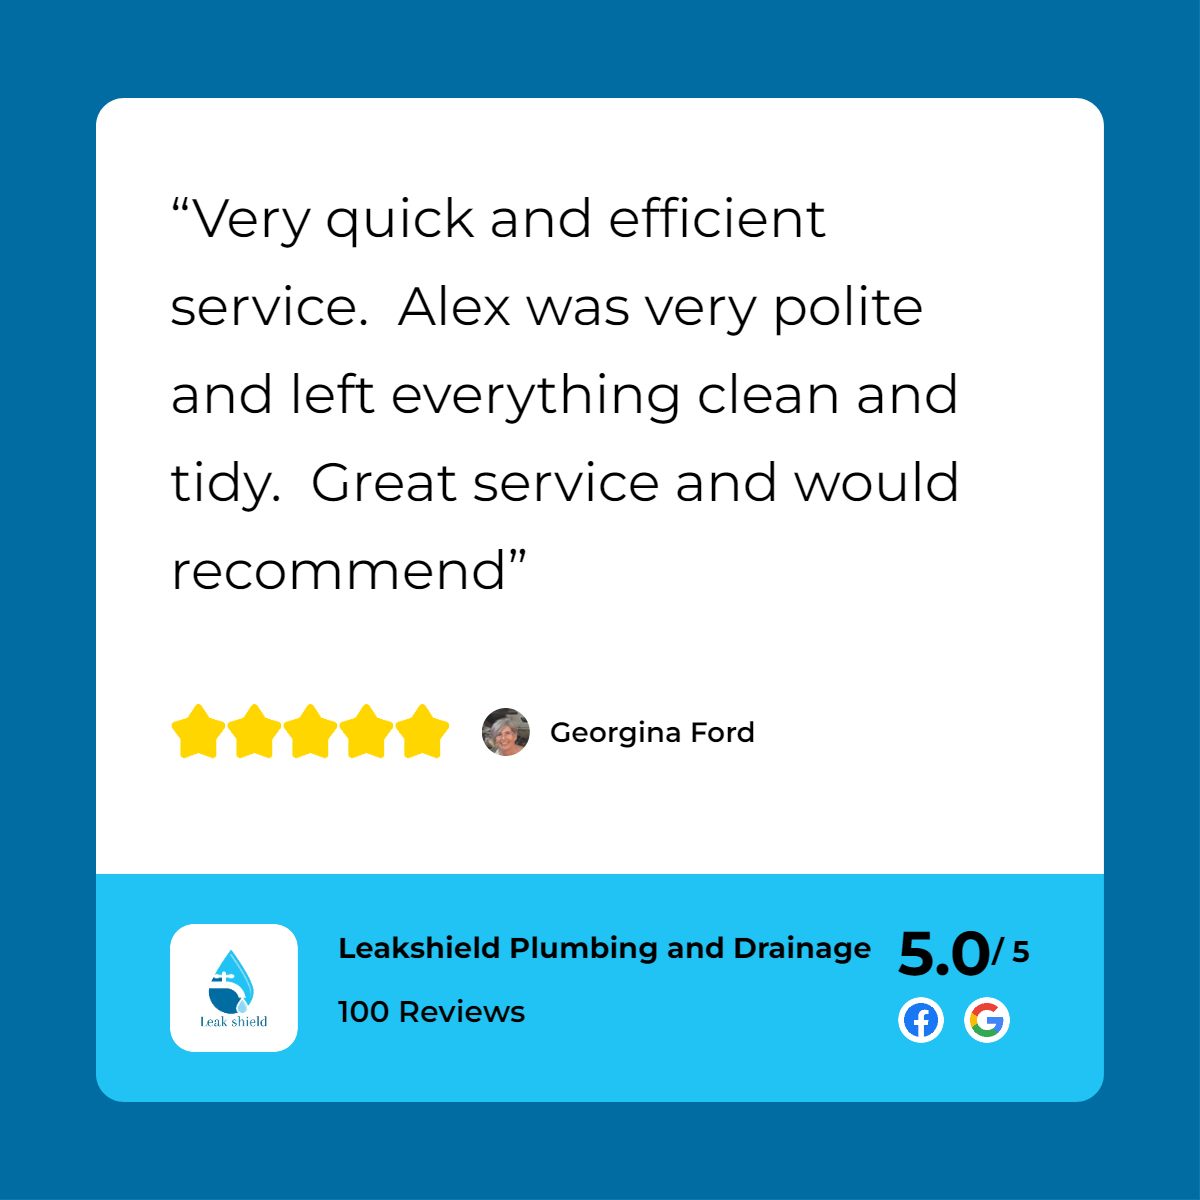 A customer review for leekhead plumbing and drains.